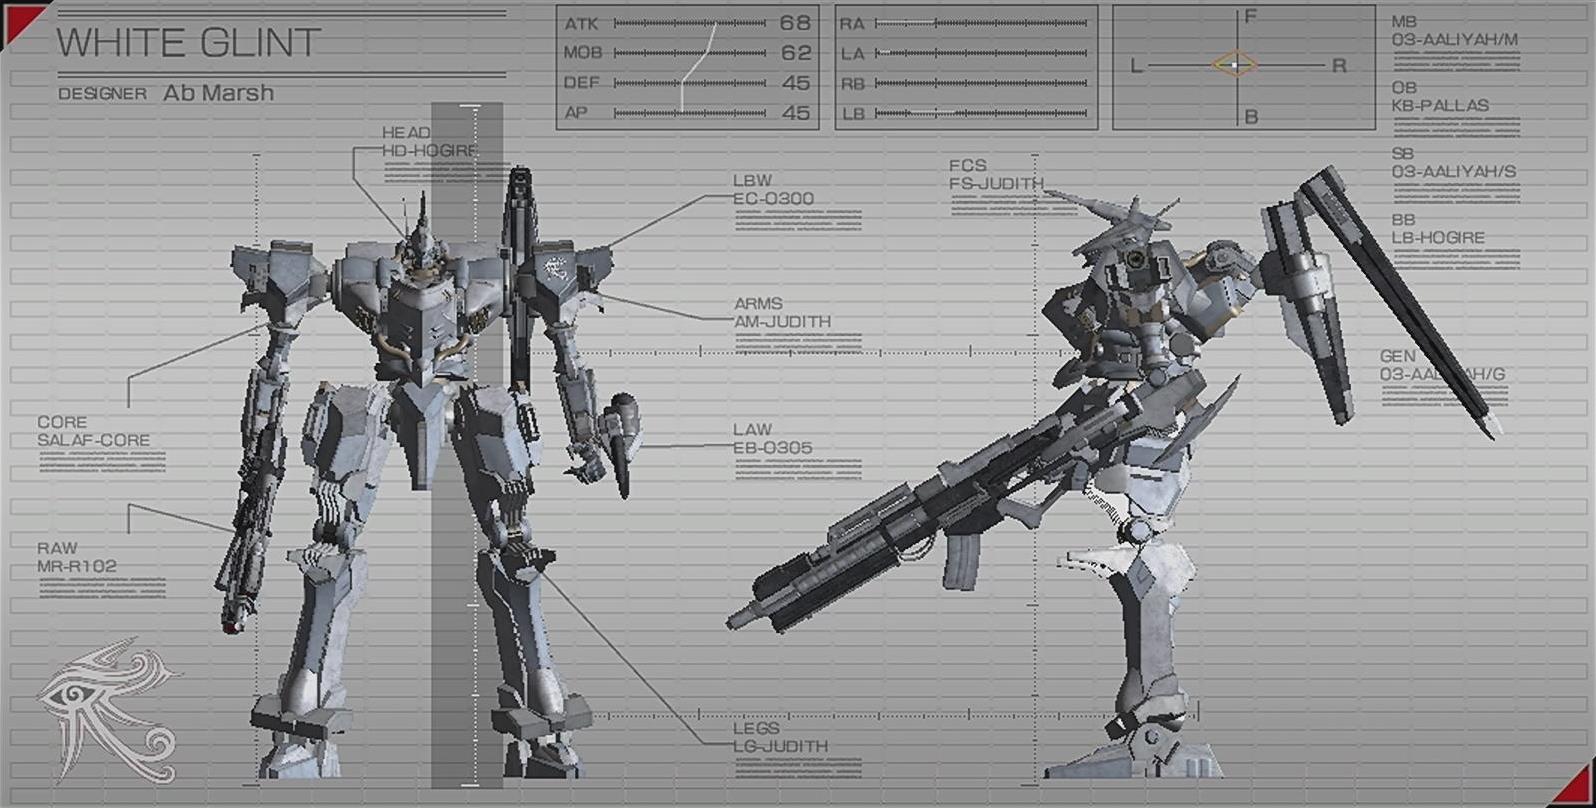 Pilot's Internal Organization (PIO) Special [2]: Armored Core VI June 14th  Recap - Articles and video links for info and reactions released about ACVI  on 6/14 (post-Summer Game Fest 2023). See comments